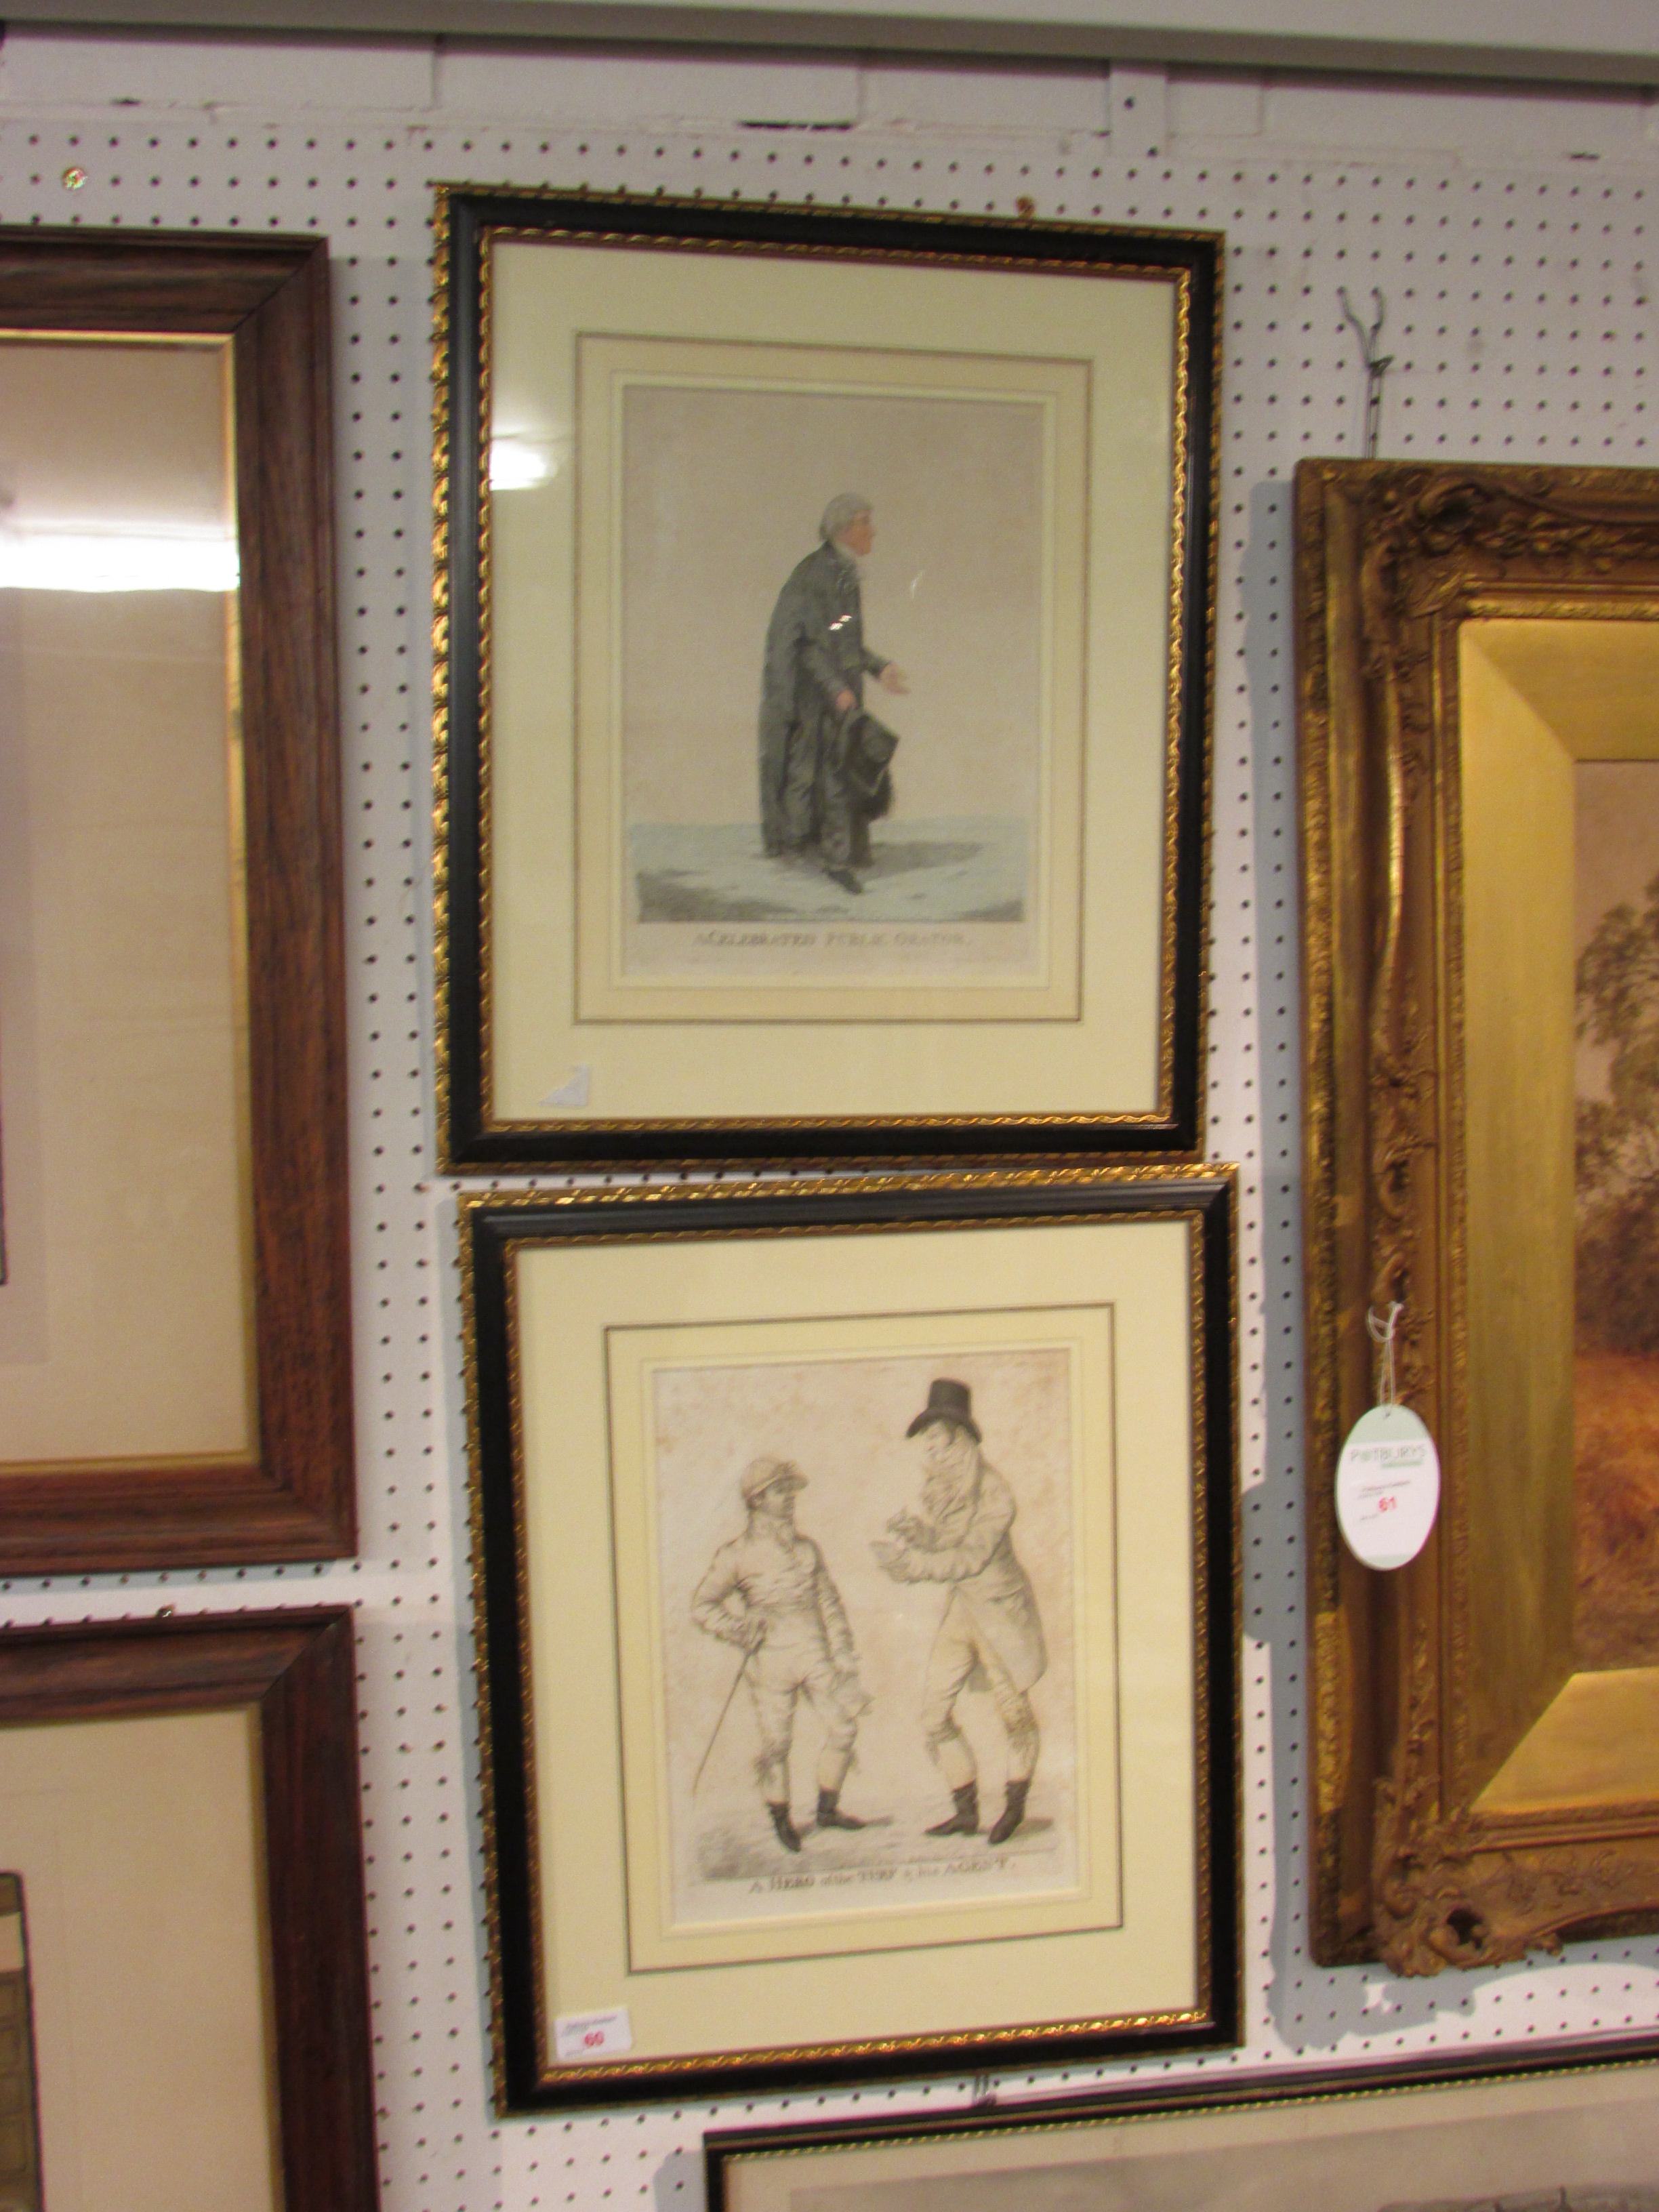 After Dighton - two etchings - 'A Celebrated Public Orator', tinted etching, 'Drawn Etch'd & Pubd by